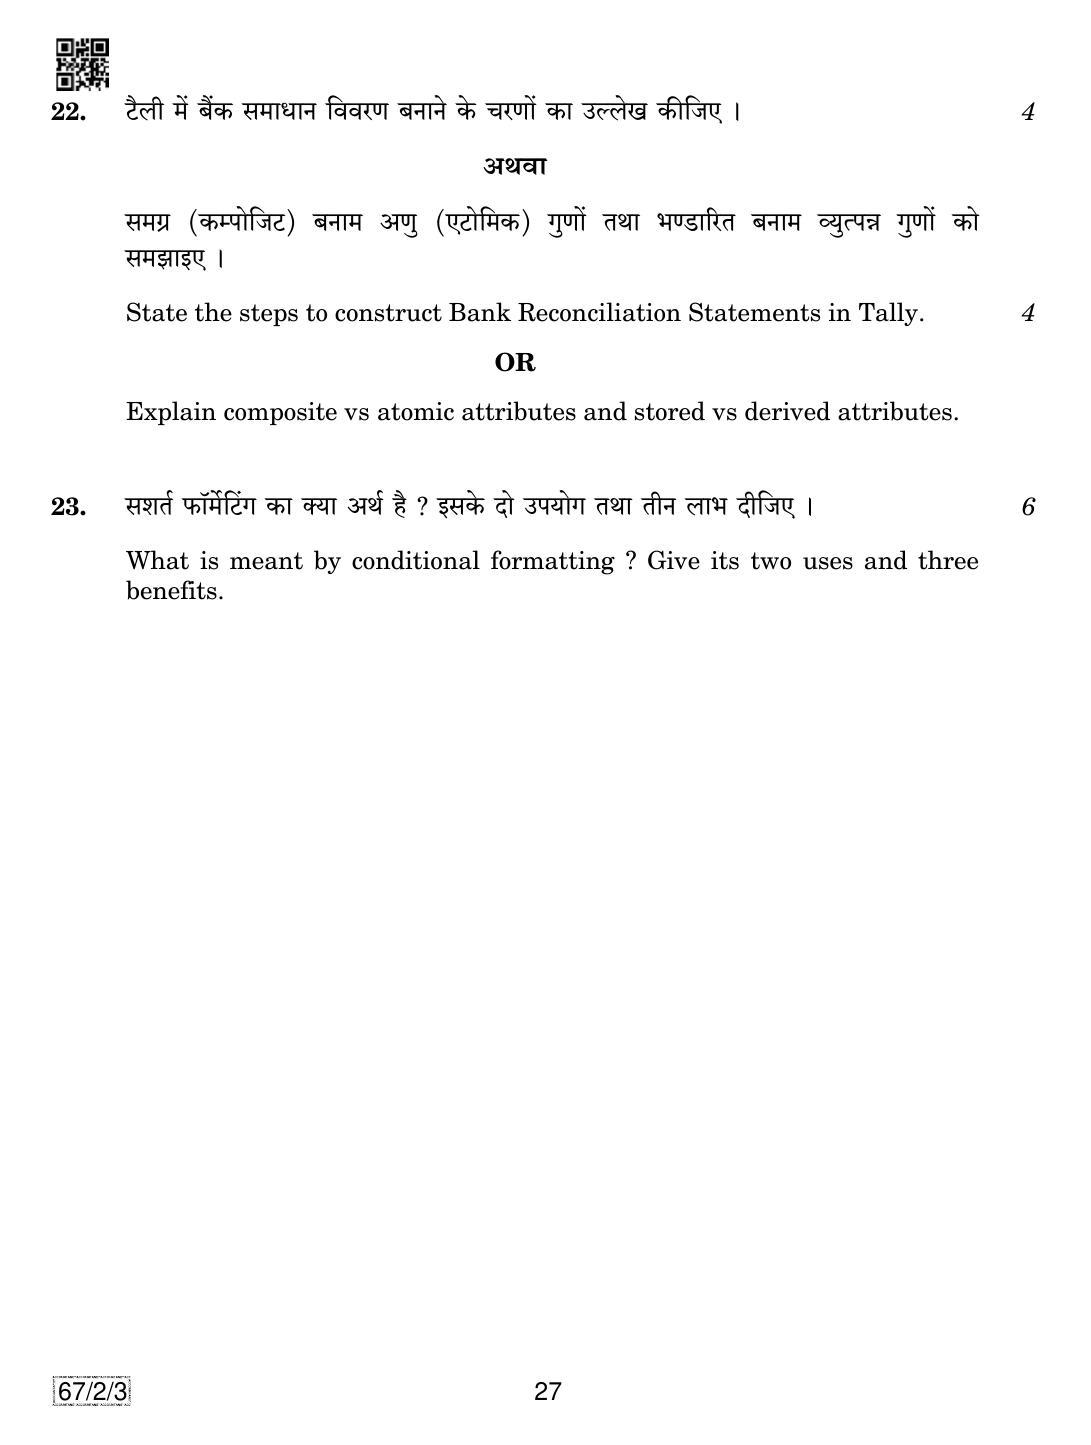 CBSE Class 12 67-2-3 Accountancy 2019 Question Paper - Page 27